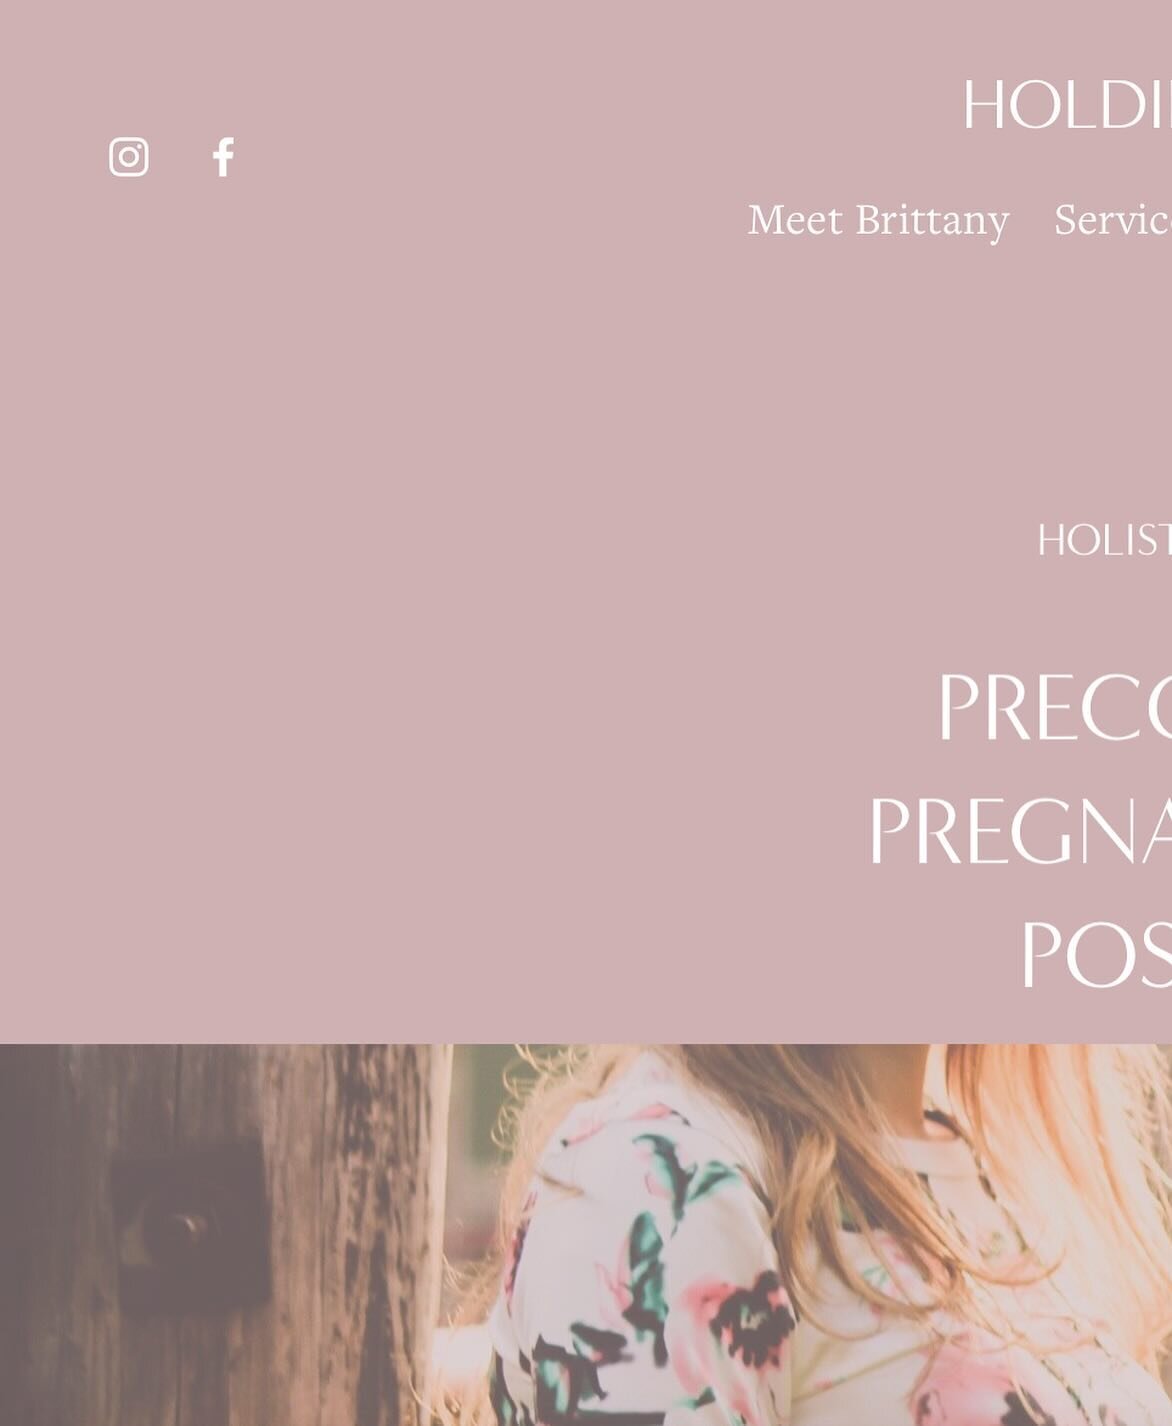 Eeeek. Here&rsquo;s a teaser! Things are changing around here. Gearing up to take my licensing exam and sharing the word that I&rsquo;ll be opening my books for midwifery clients soon, but only taking on 2 clients a month so reach out early if you&rs